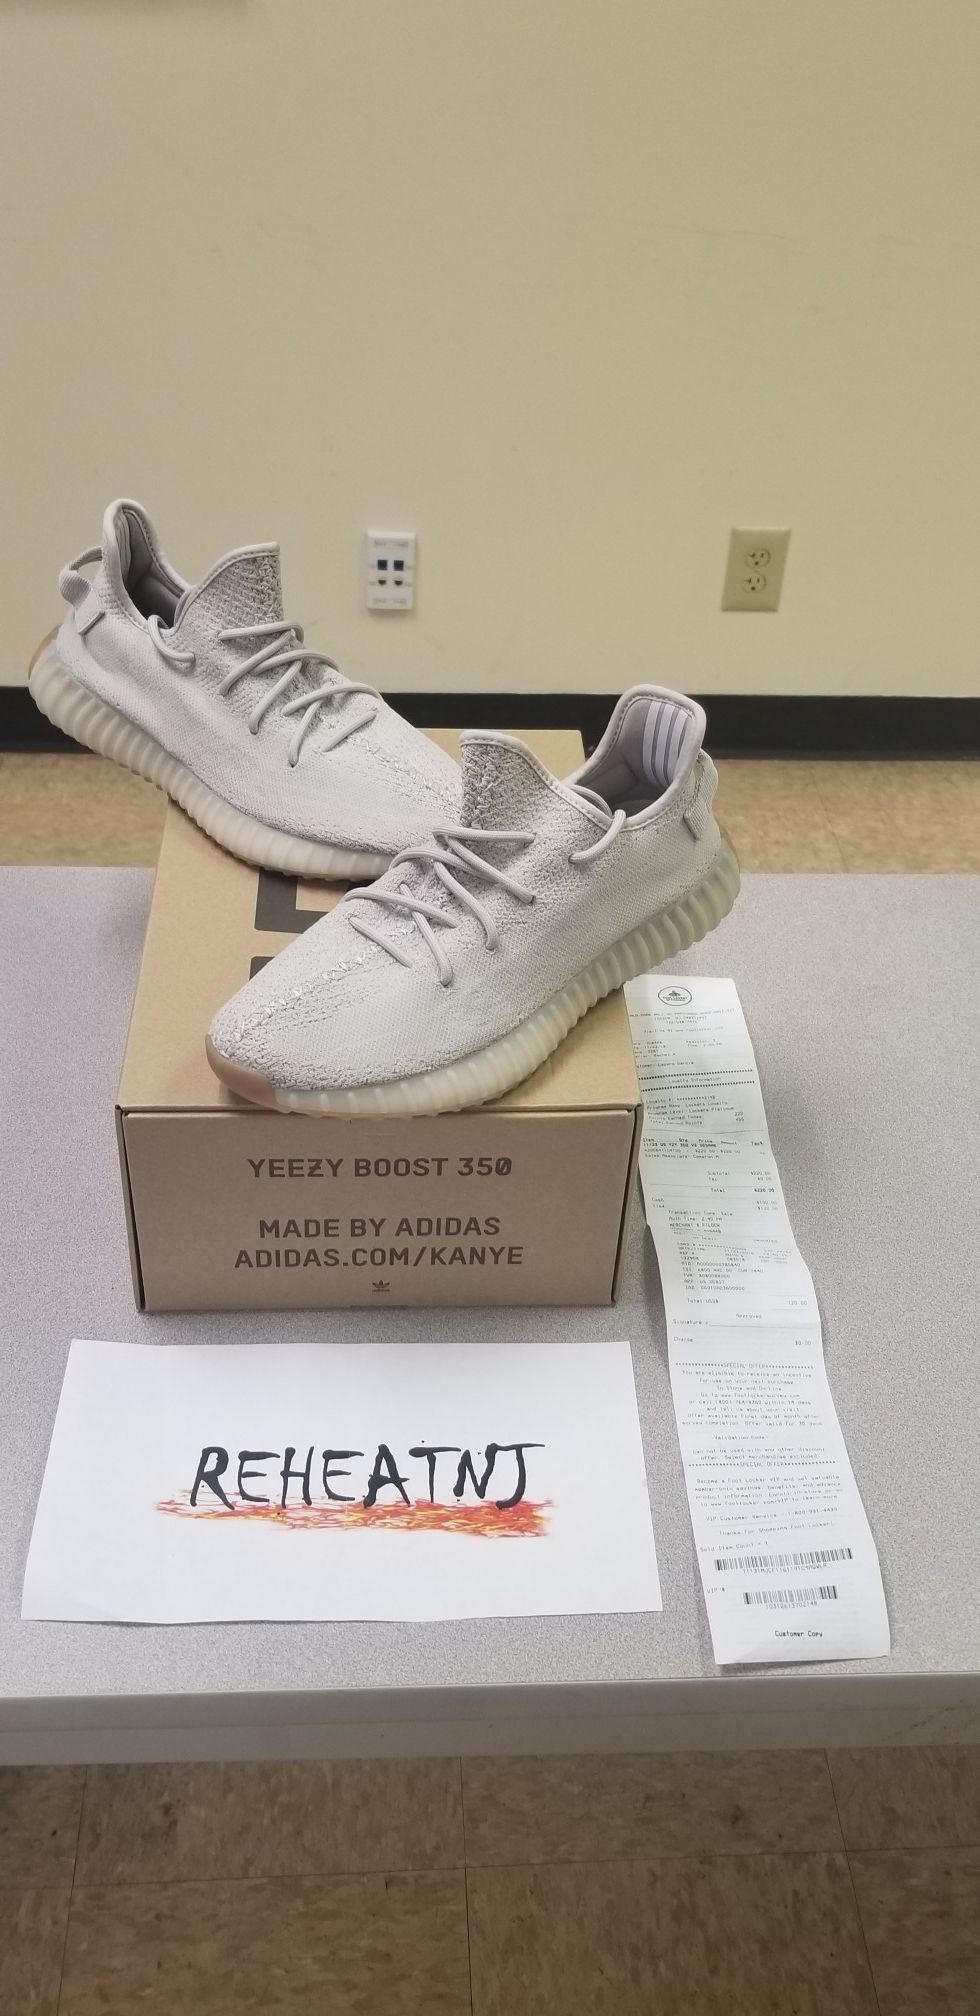 Yeezy Boost 350 V2 Sesame Size 10.5 New in Box Authentic with Footlocker for Sale in Woodbridge Township, NJ - OfferUp